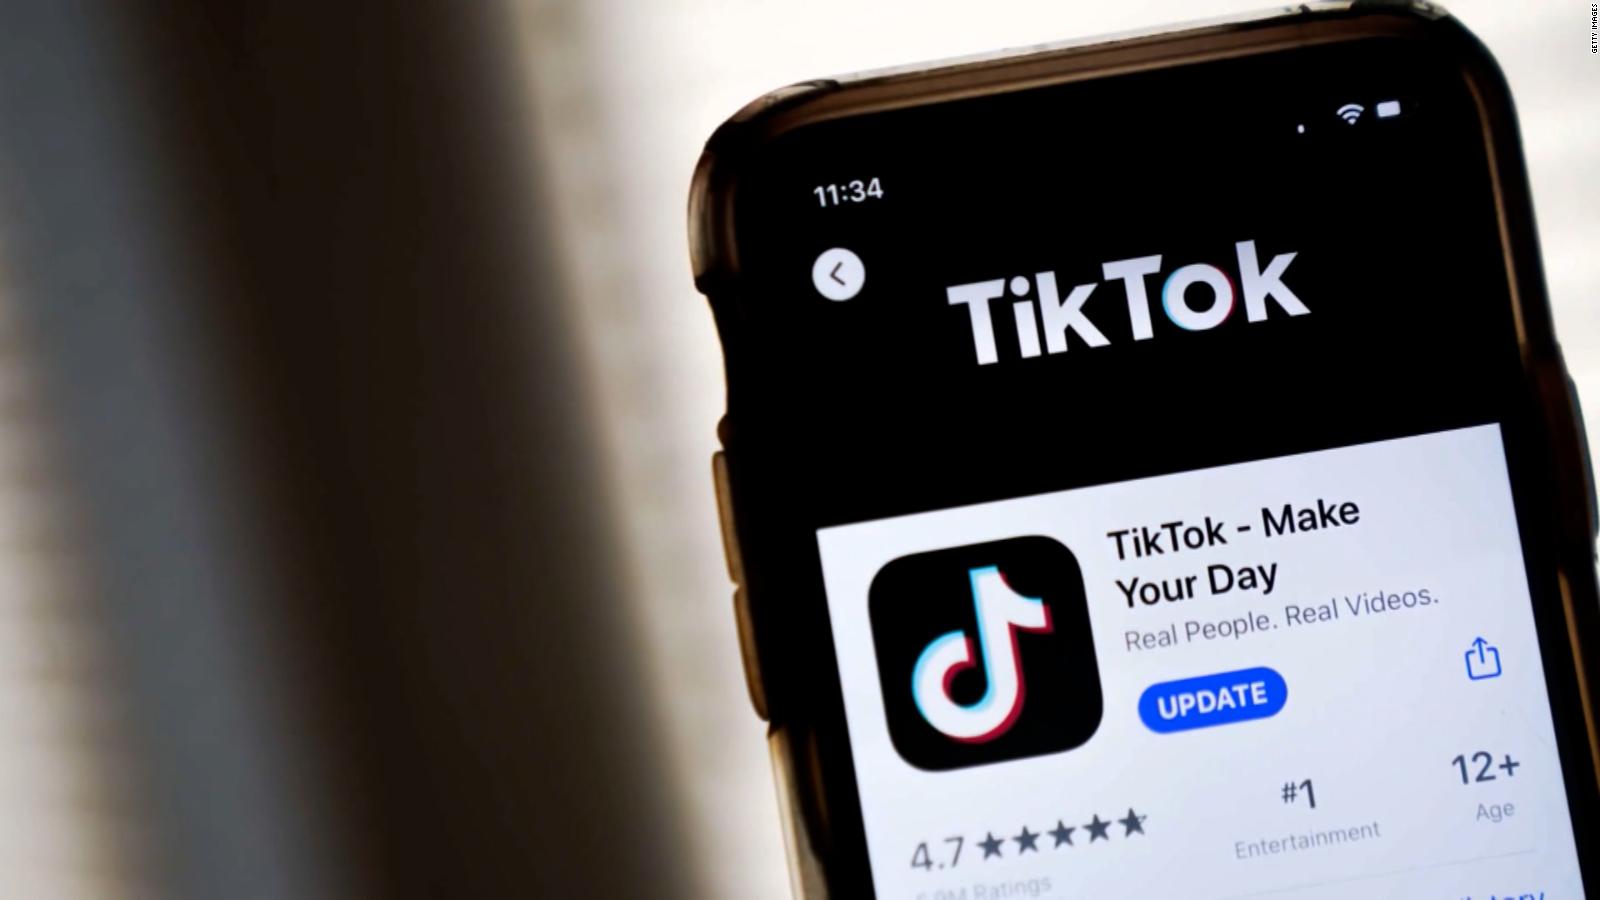 New Zealand joins US push to ban use of TikTok on official phones